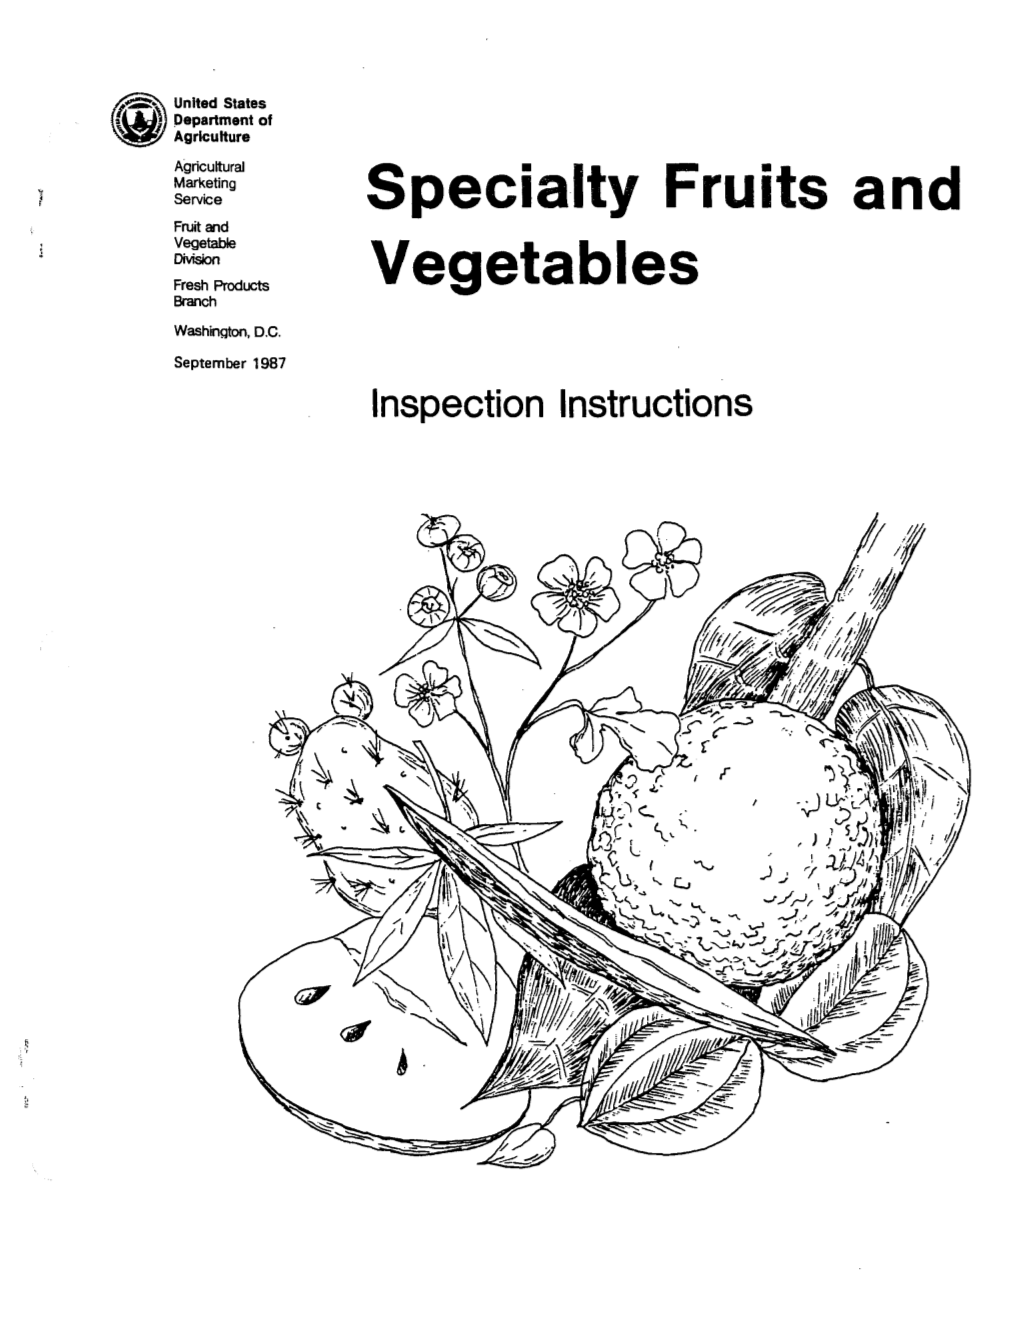 Specialty Fruits and Vegetables